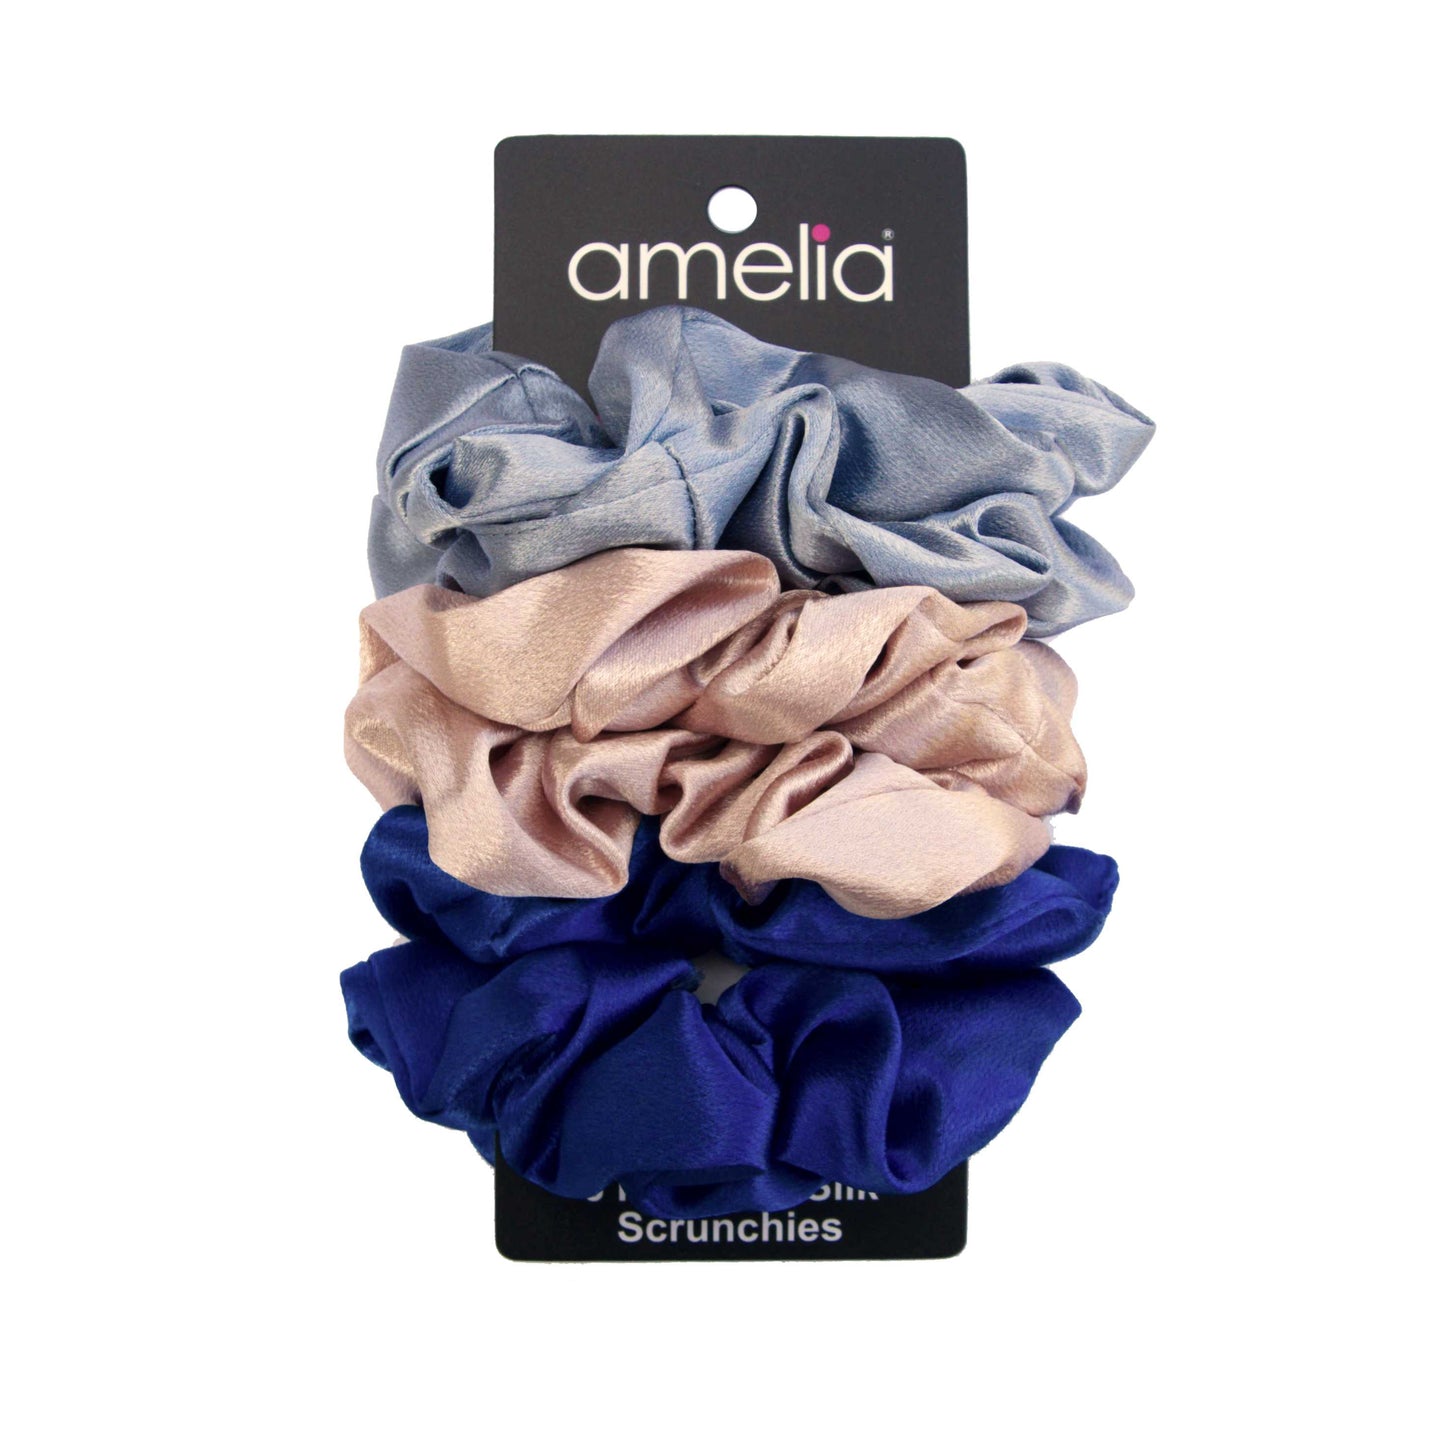 Amelia Beauty, Ocean Mix Imitation Silk Scrunchies, 4.5in Diameter, Gentle on Hair, Strong Hold, No Snag, No Dents or Creases. 6 Pack